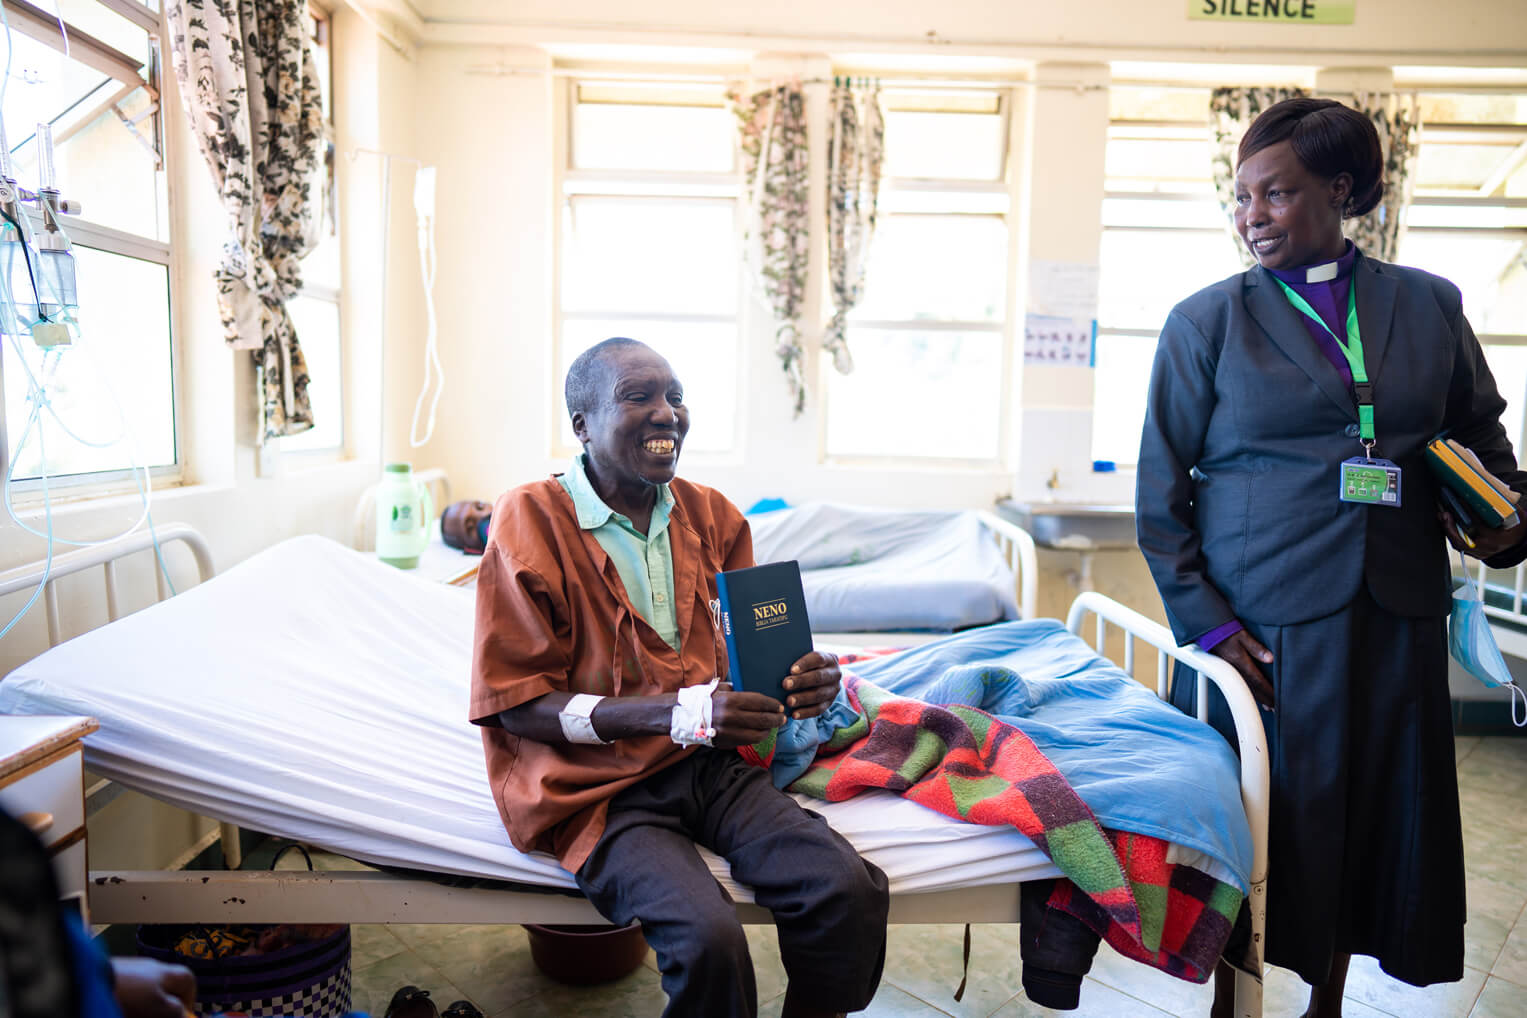 Through our chaplain training program at Kenya's mission hospitals, the Good News of Jesus Christ is bringing hope and comfort to people in crisis.